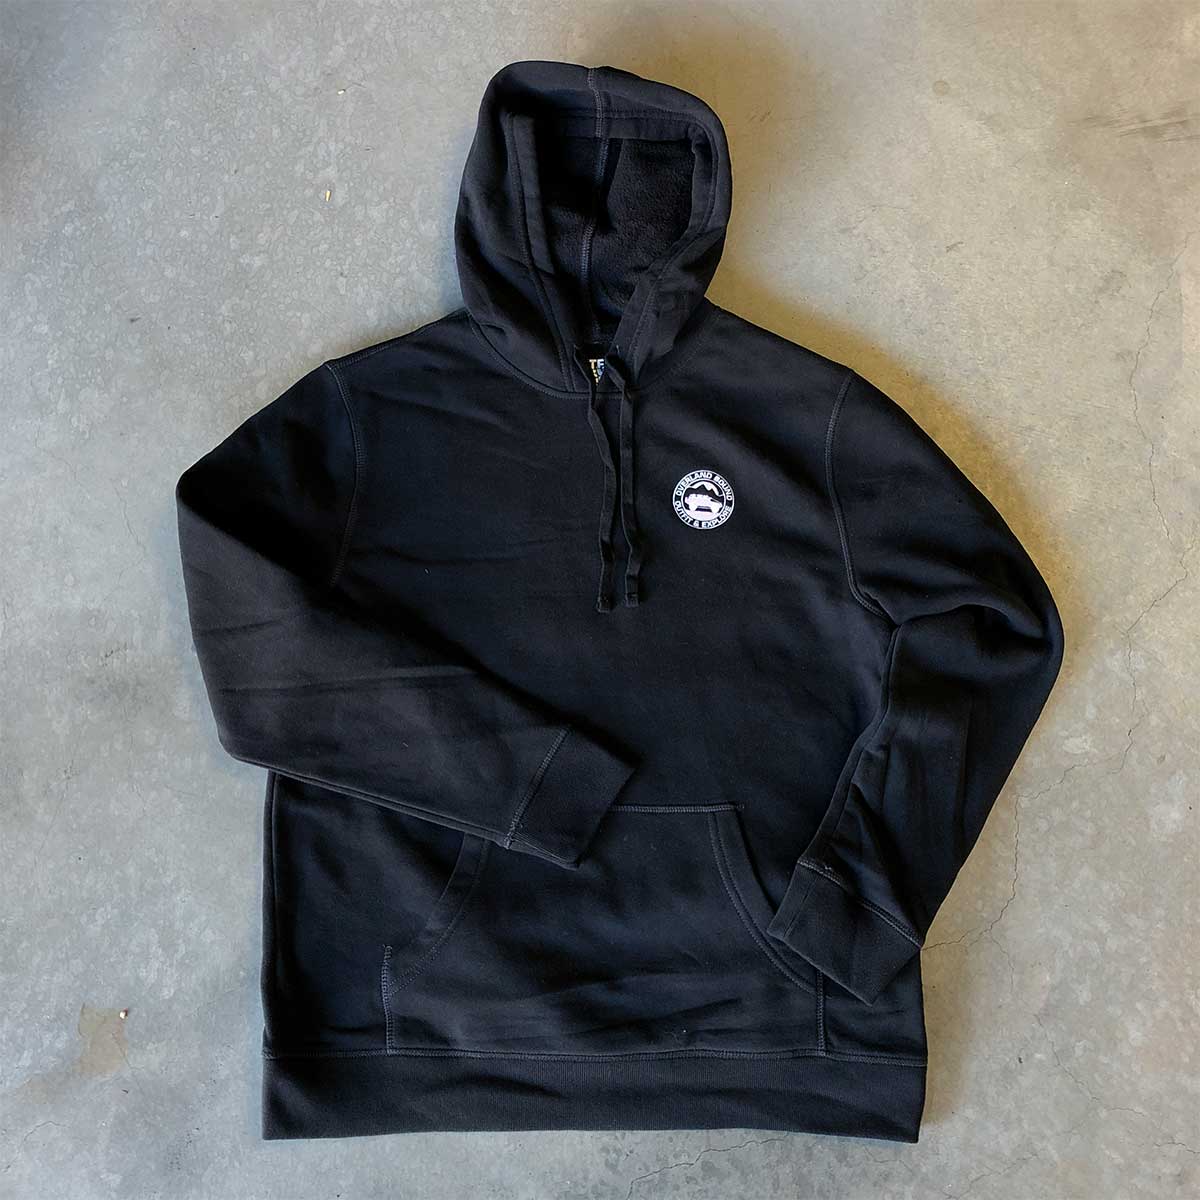 Outfit & Explore Pullover Black Hoodie - Overland Bound